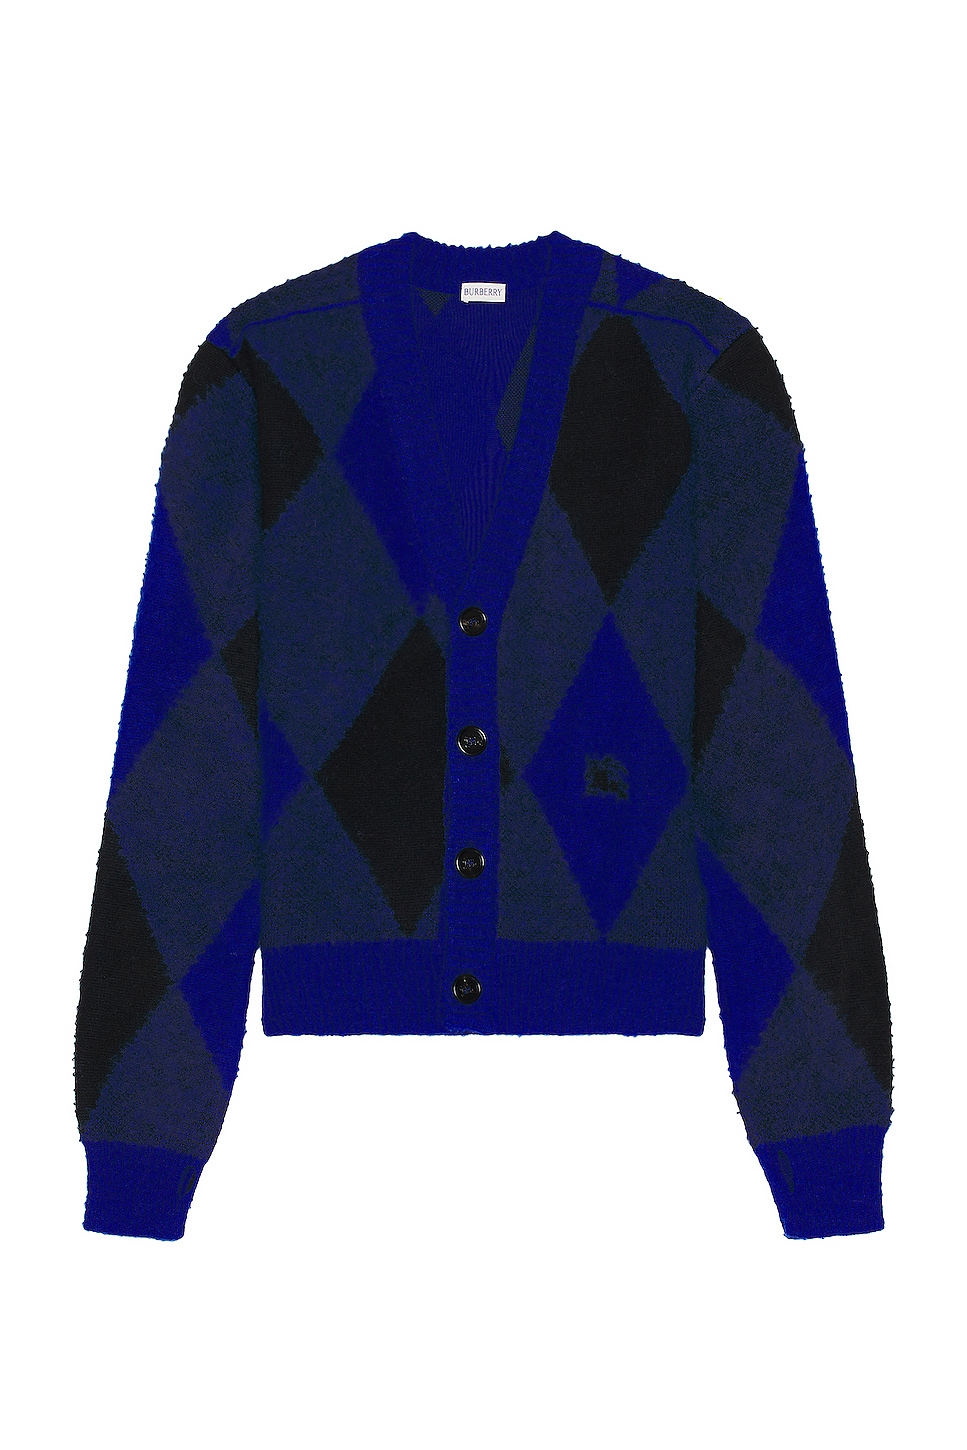 Image 1 of Burberry Pattern Cardigan in Knight Ip Pattern